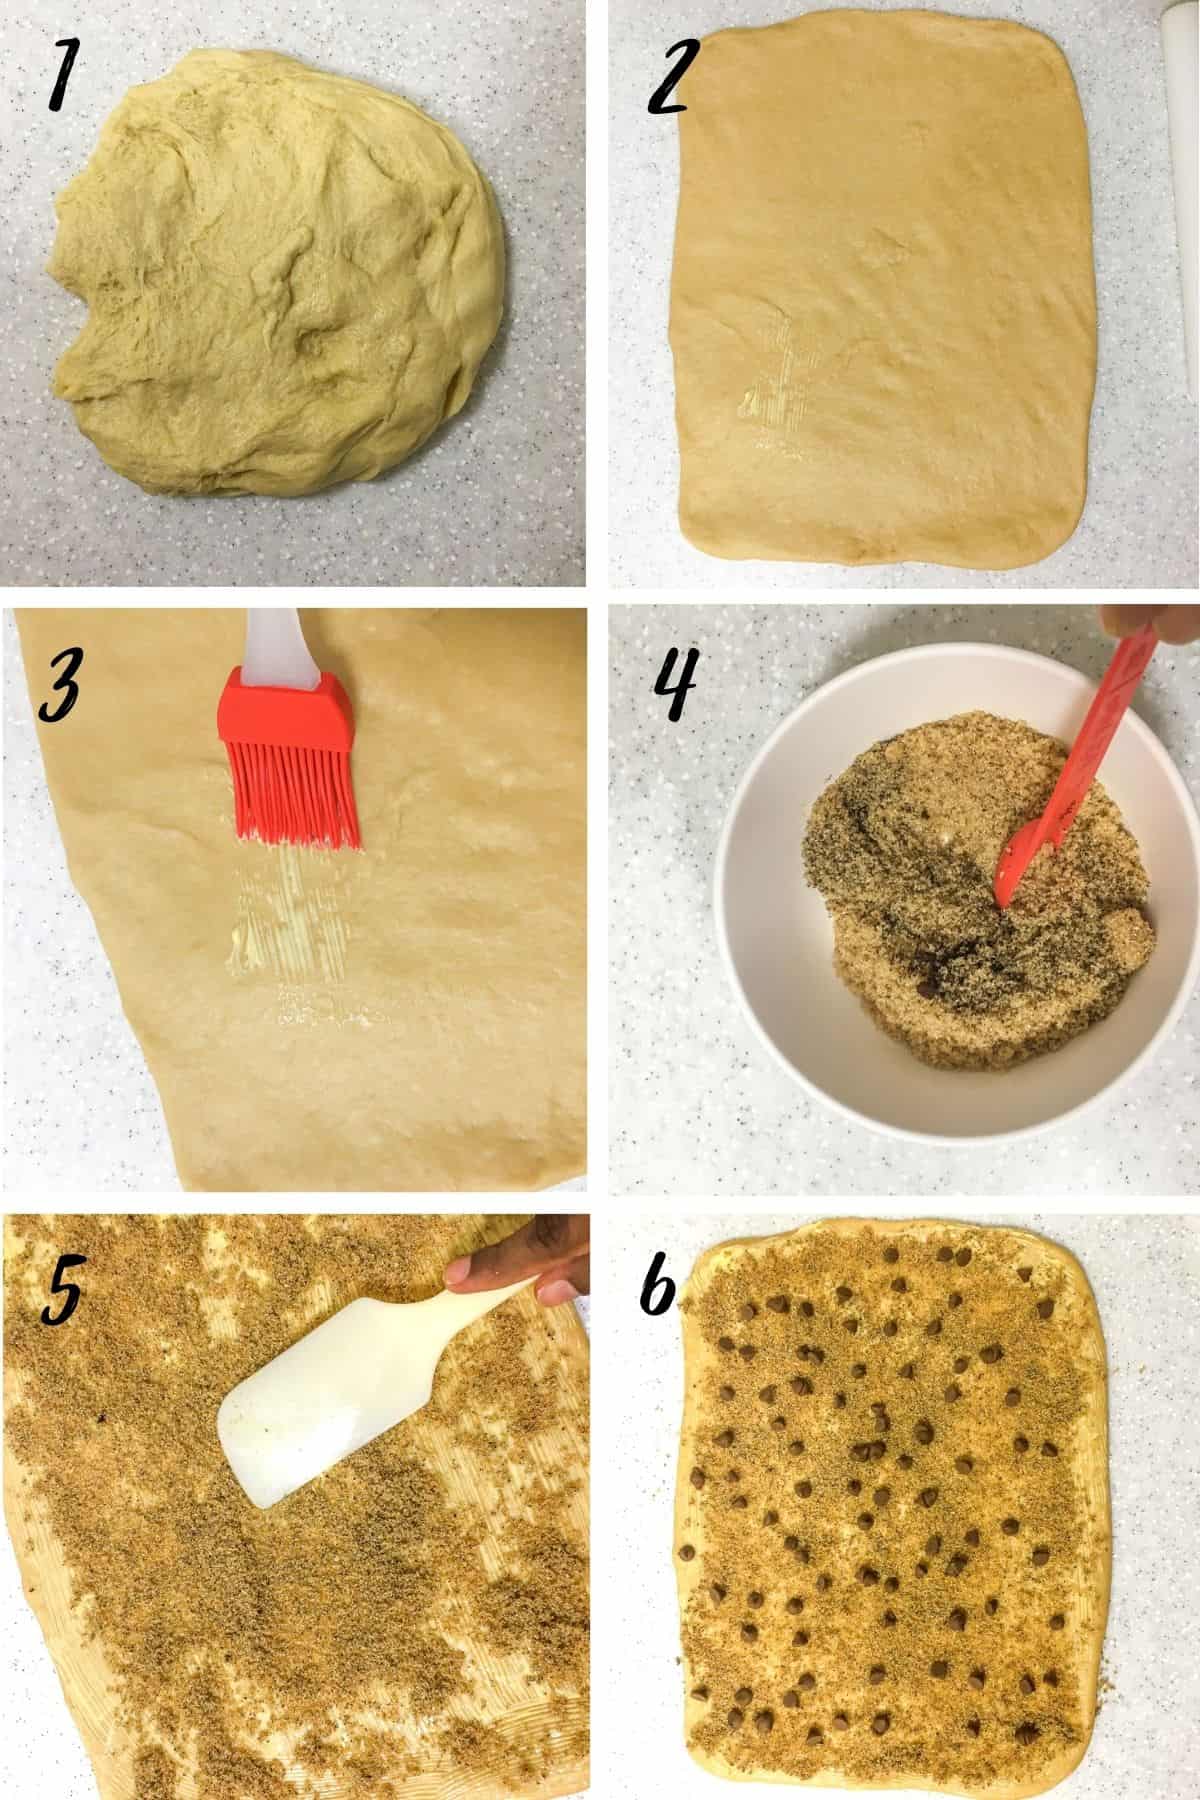 A poster of 6 images showing how to assemble coffee rolls